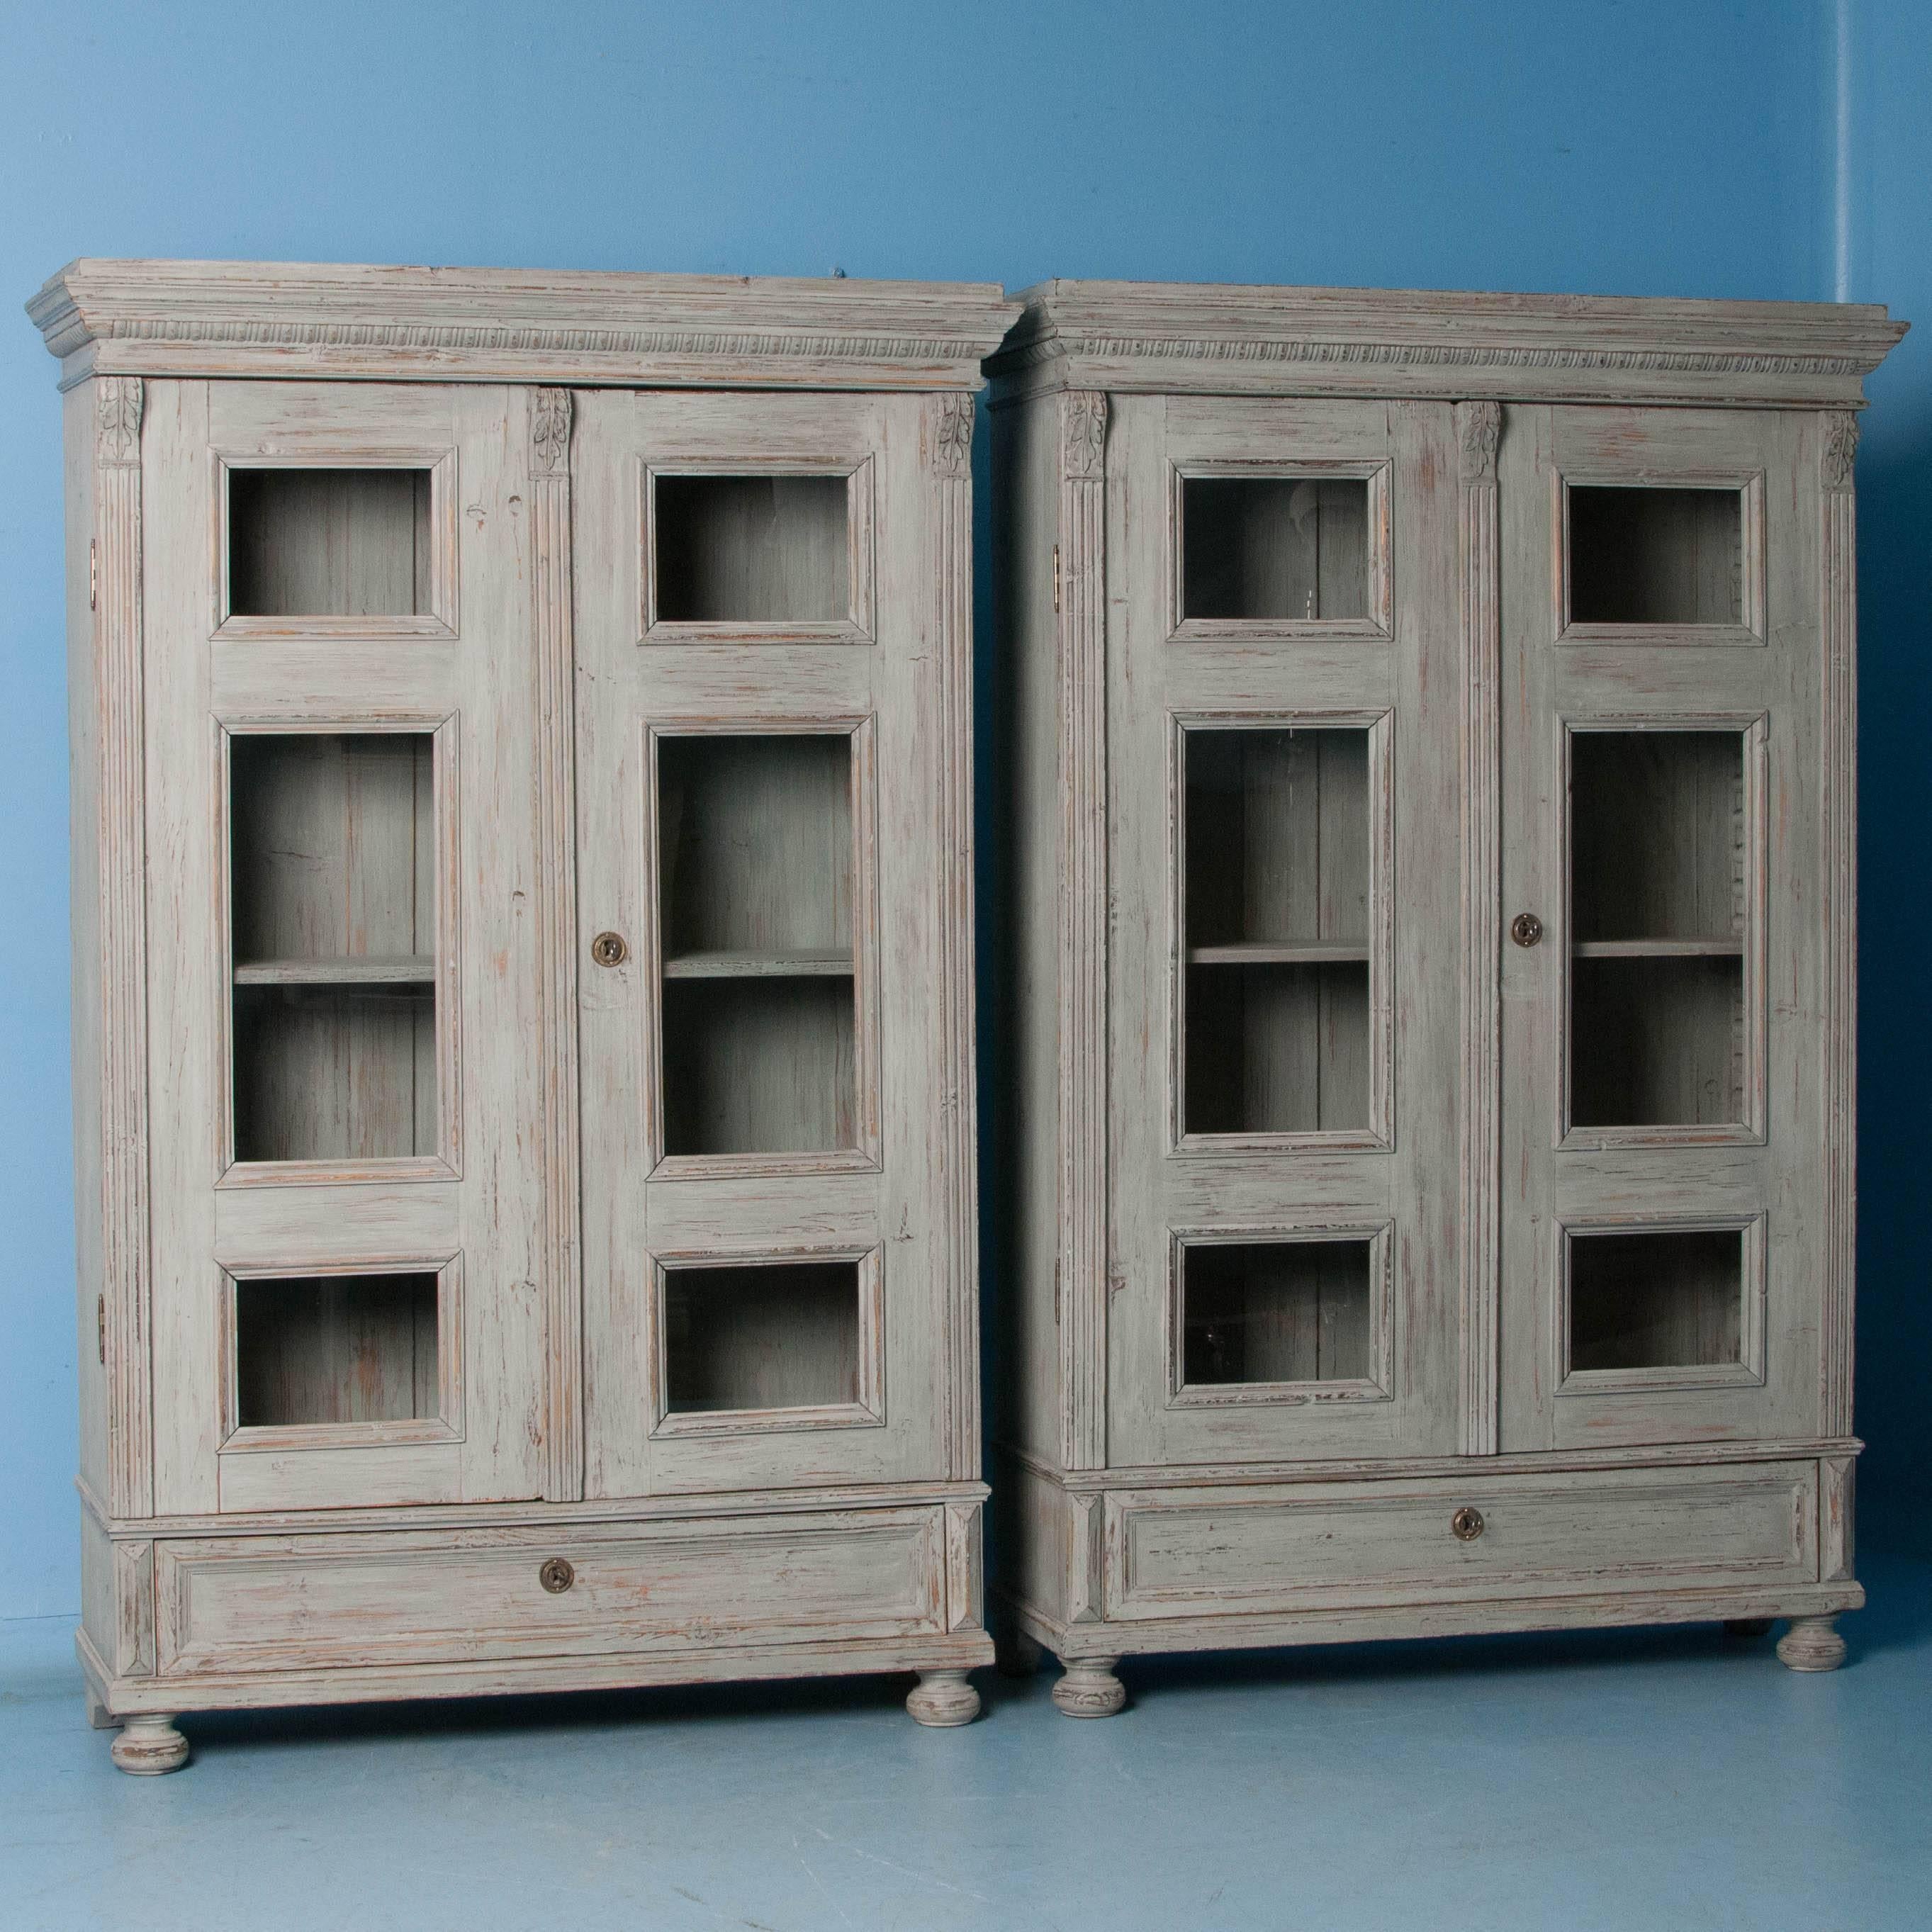 These exceptional bookcases are a tremendous find as it is difficult to find a matching pair. The lovely Gustavian gray chalk paint is perfectly distressed to fit with the age and character of the pair. One notices the symmetry and balance of the